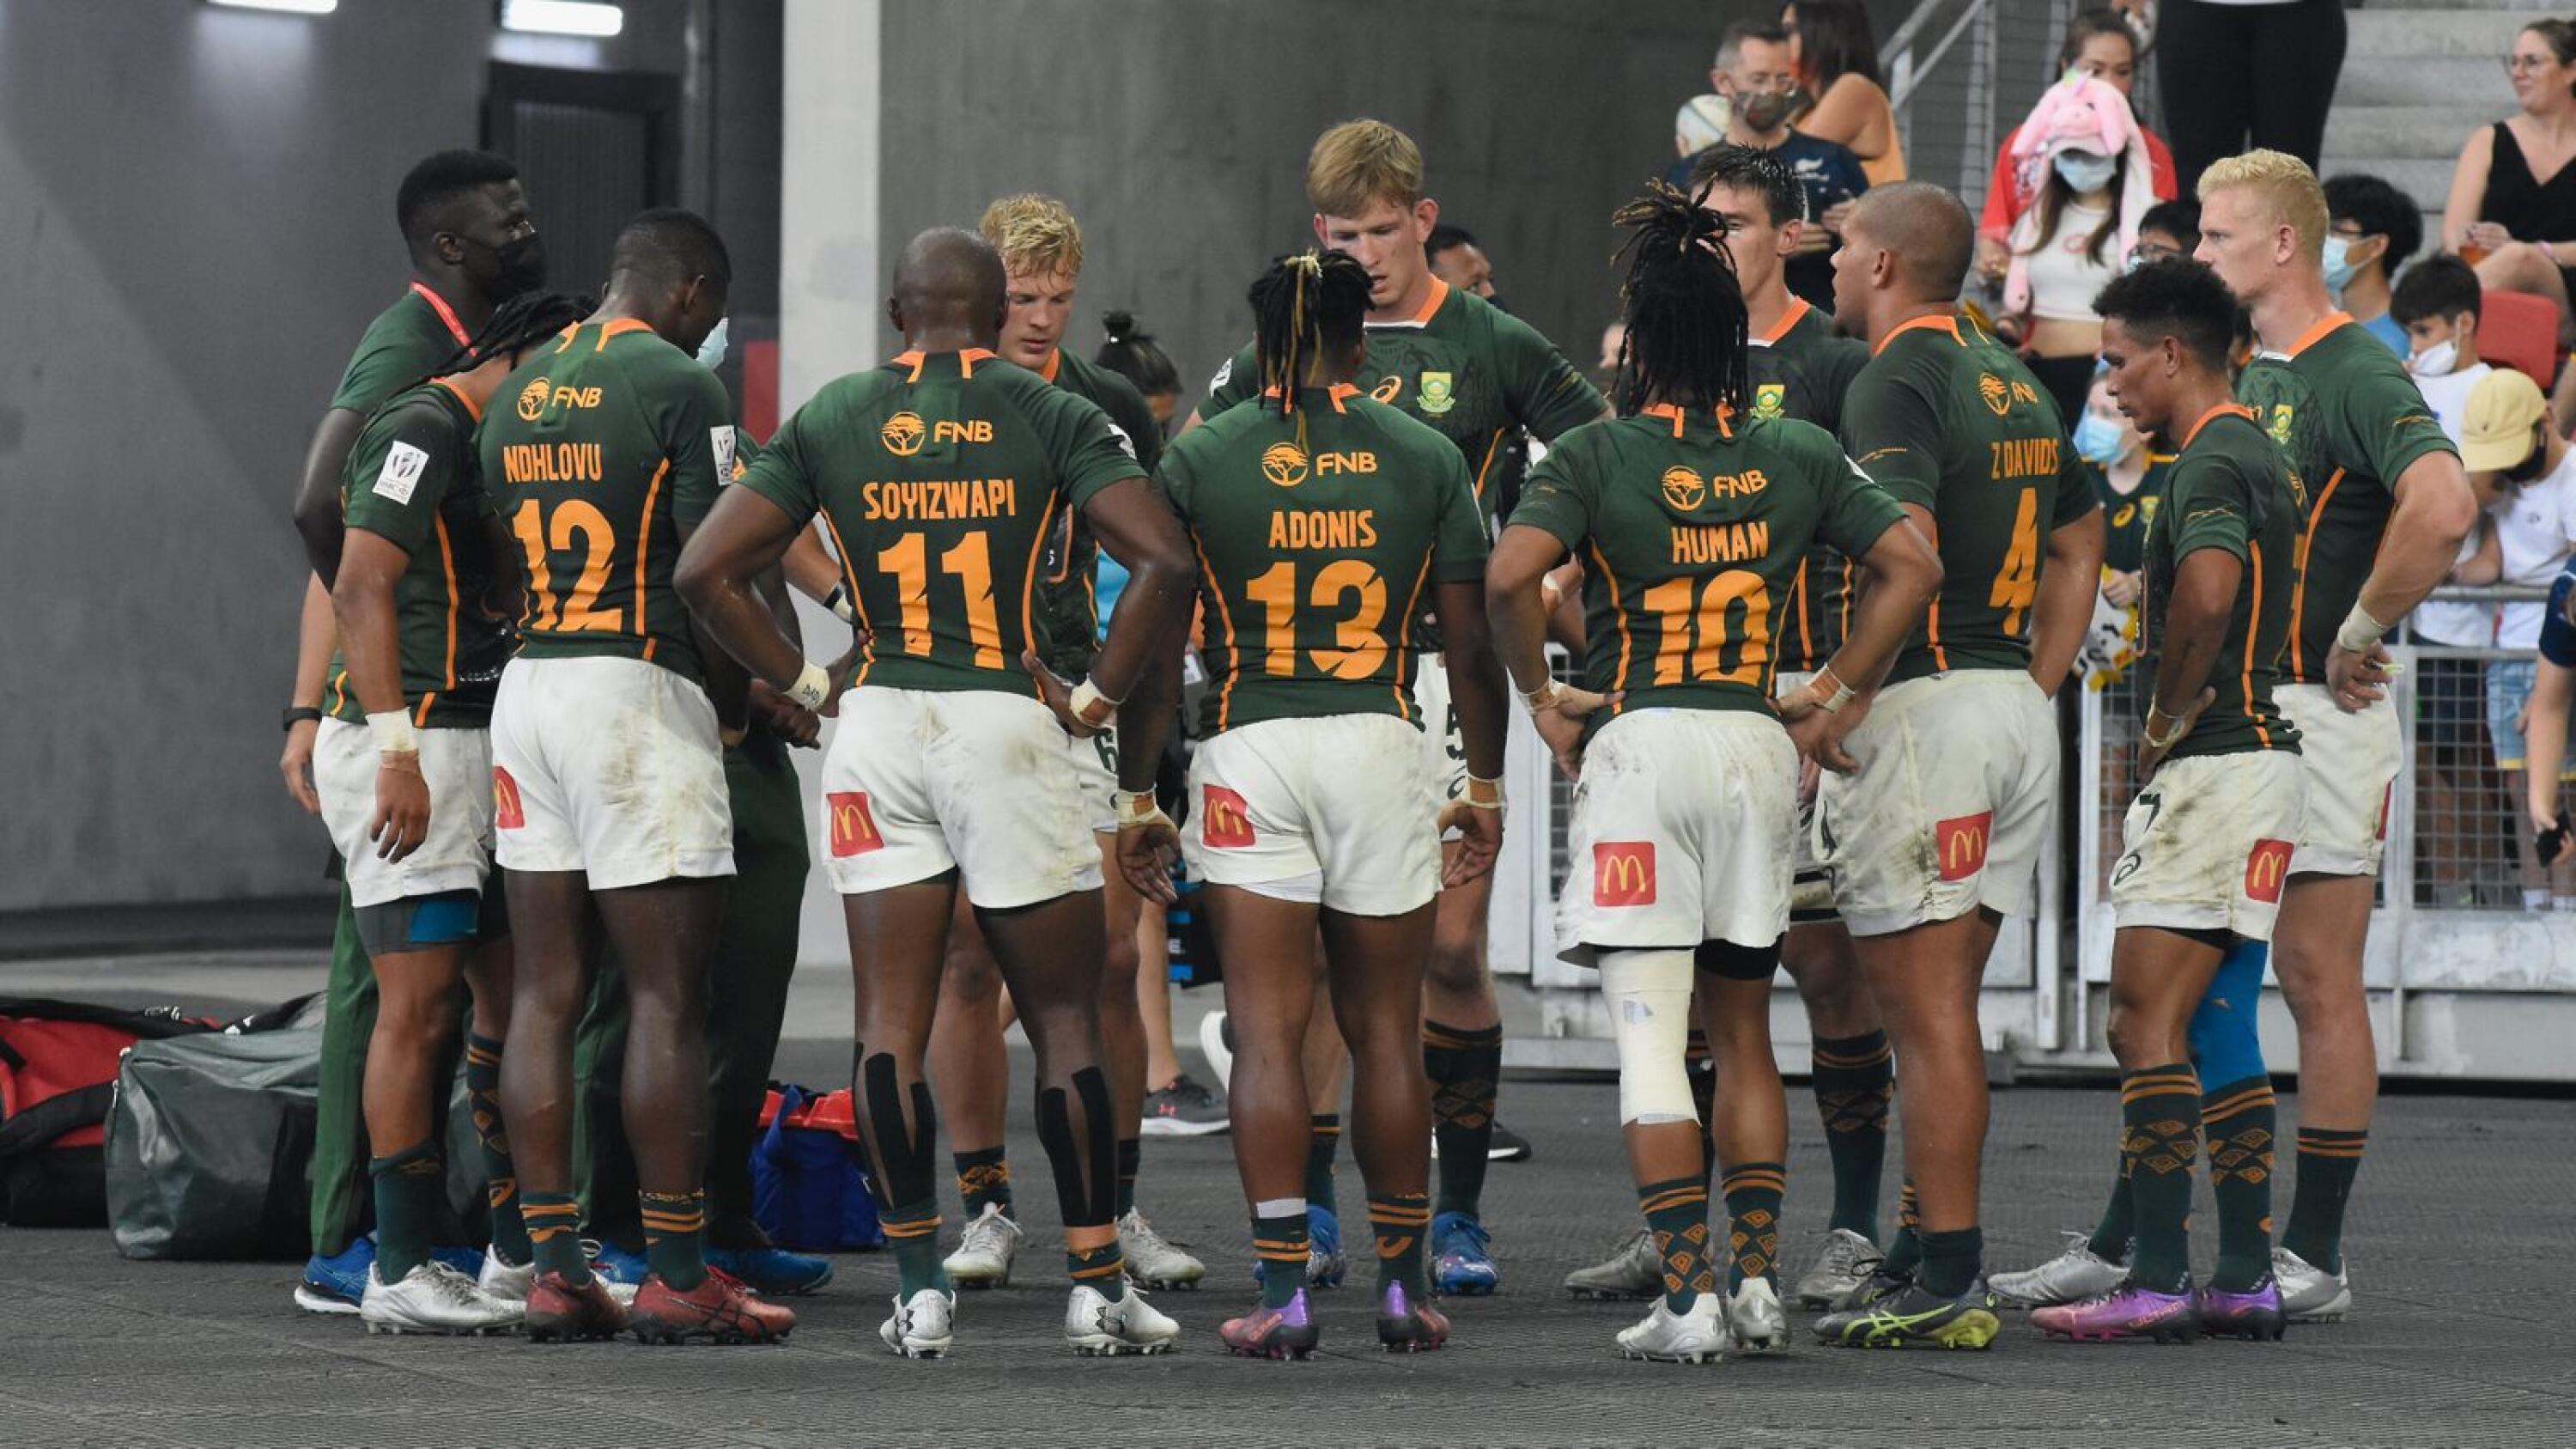 Blitzboks coach Neil Powell is disappointed with how his team capitulated and lost three games in a row at the Singapore Sevens after going on a run of 36 consecutive wins